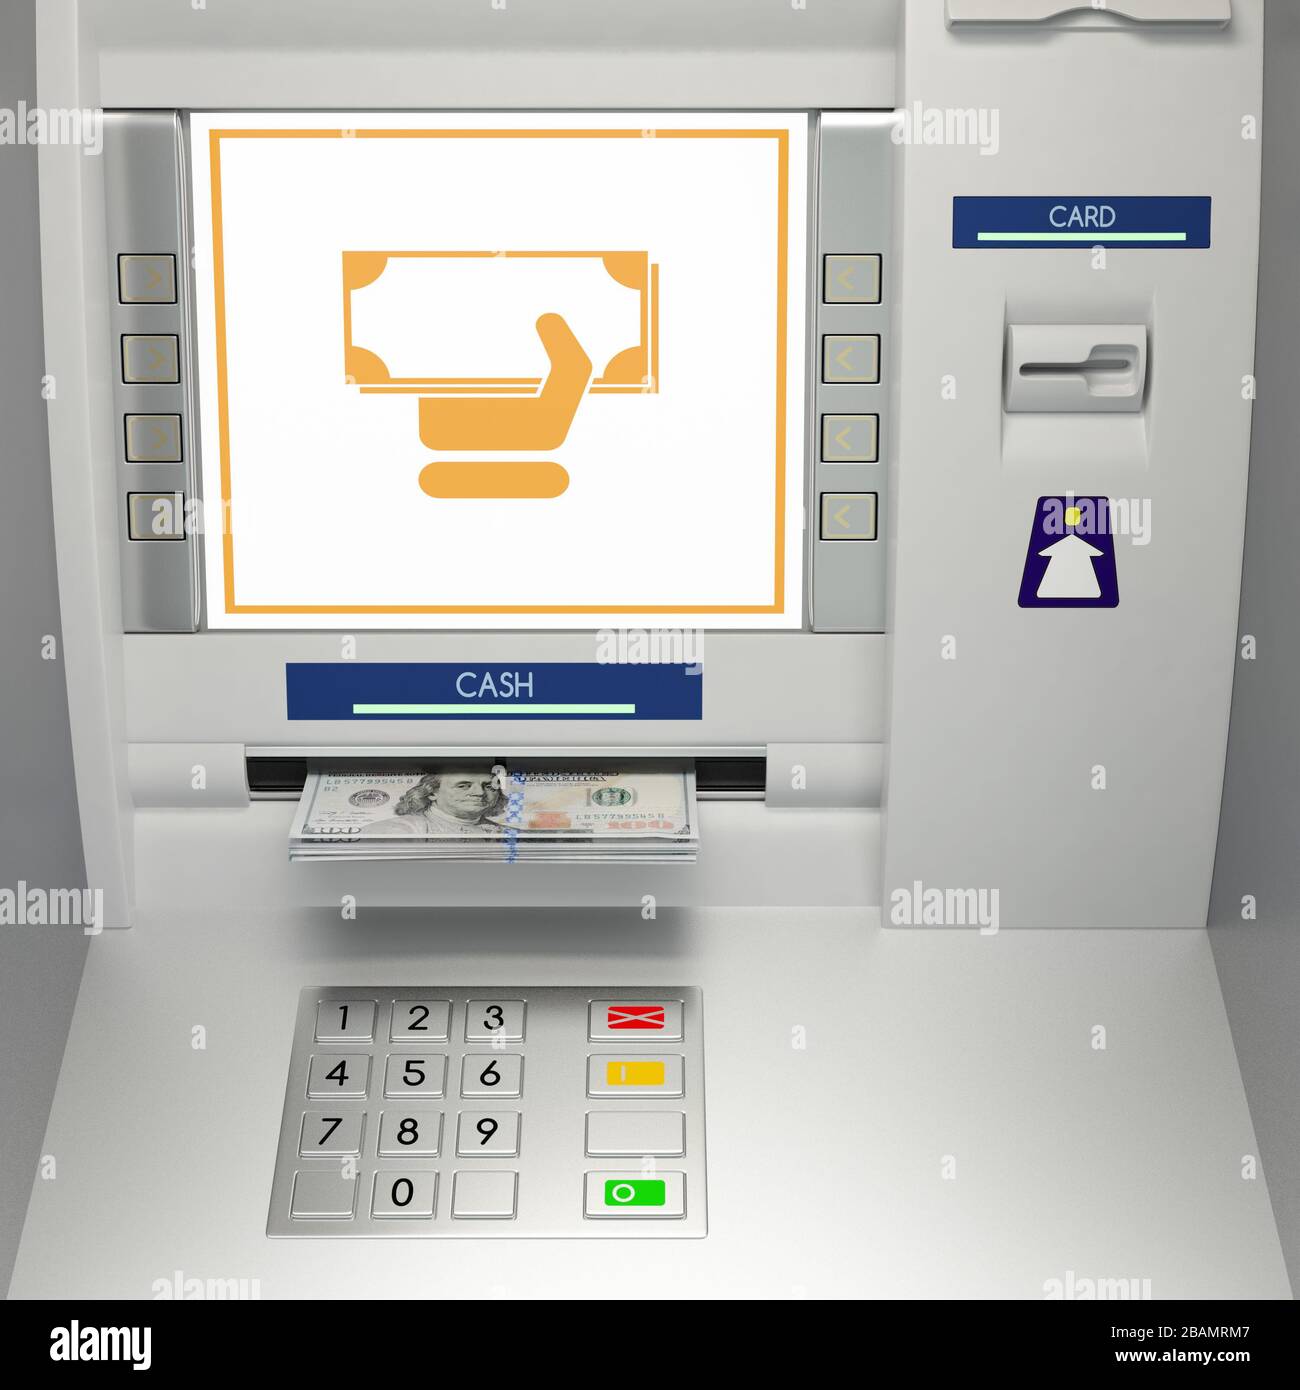 ATM machine, banknotes in money slot Stock Photo